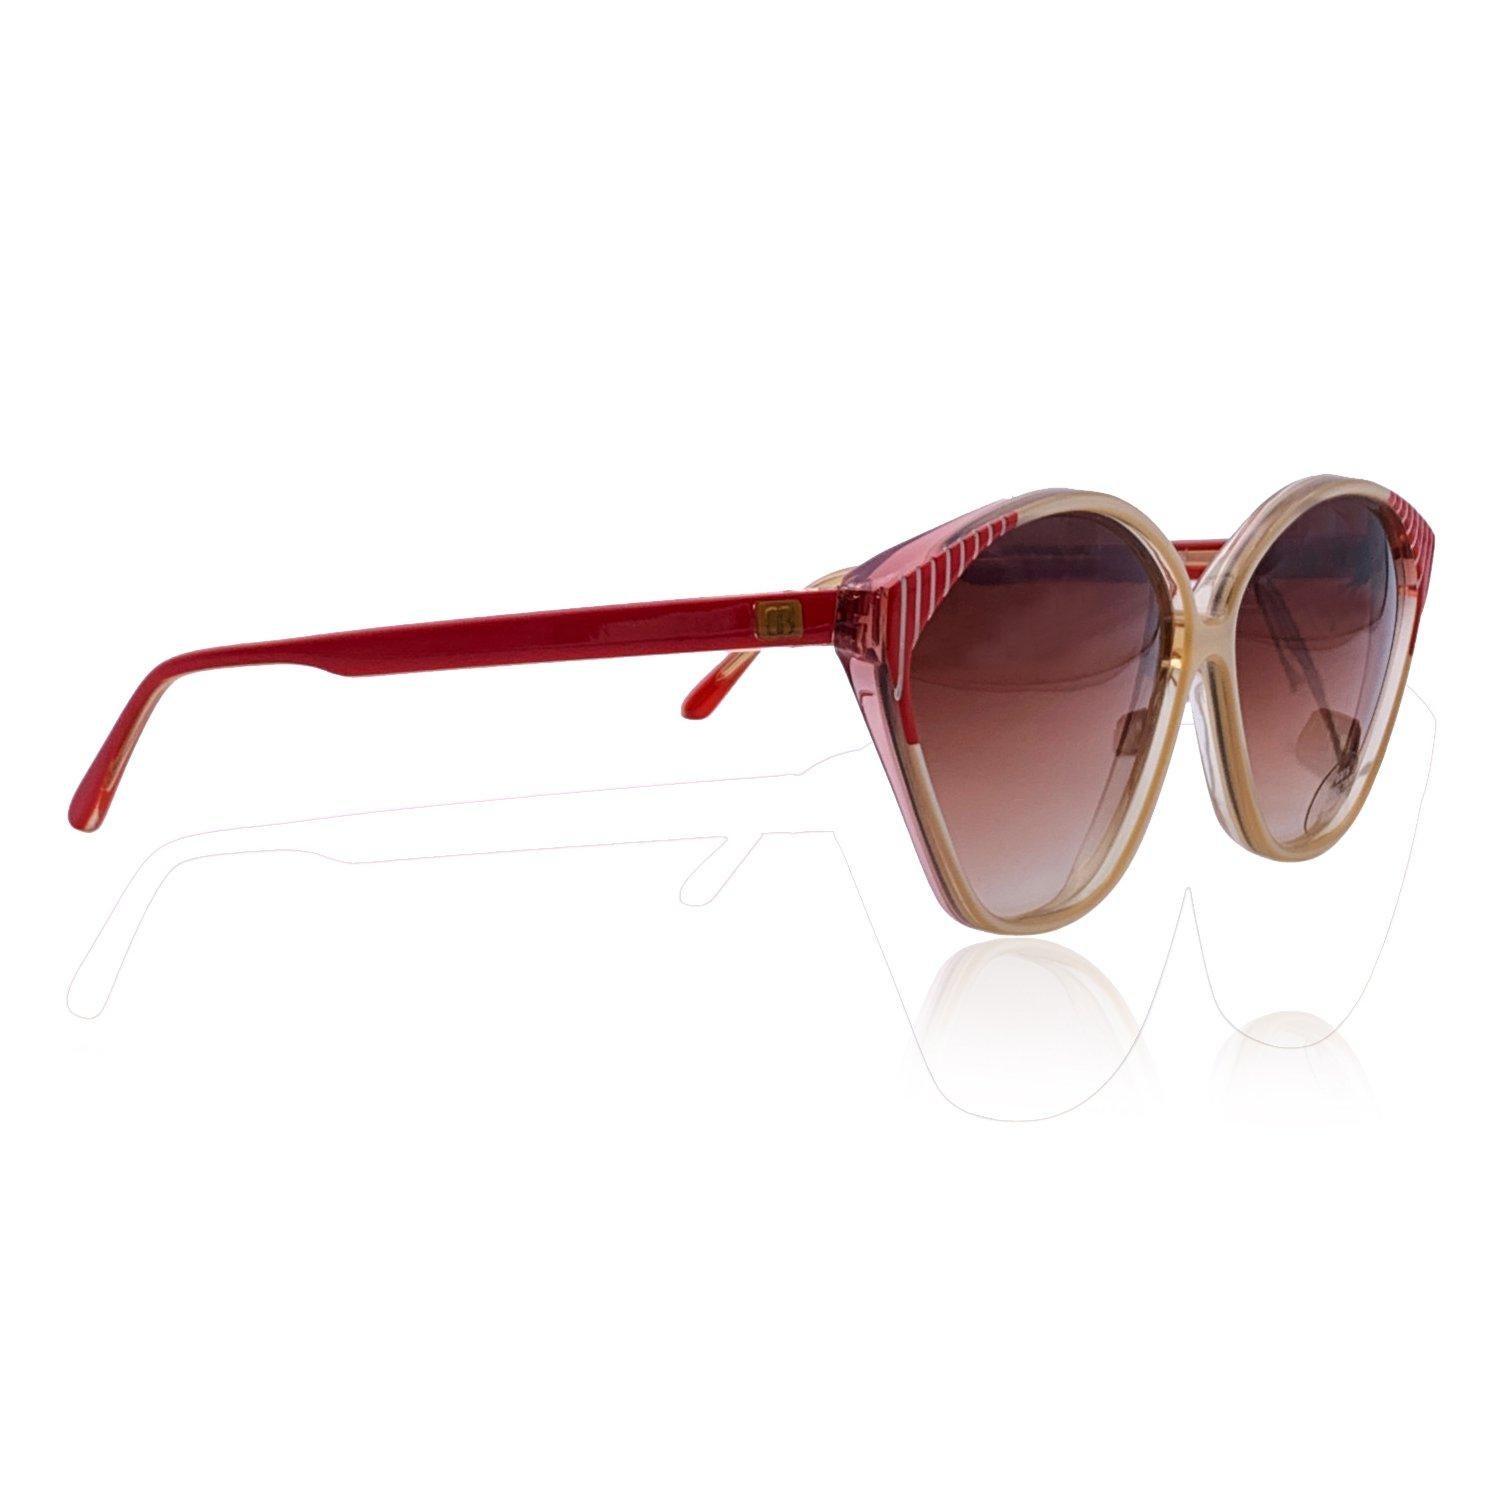 Vintage Balenciaga sunglasses mod. 2403.Red and white acetate frame. Logo on temples. Original 100% Total UVA/UVB protection in gradient brown color. Made in France Details MATERIAL: Acetate COLOR: Red MODEL: 2403 GENDER: Women COUNTRY OF